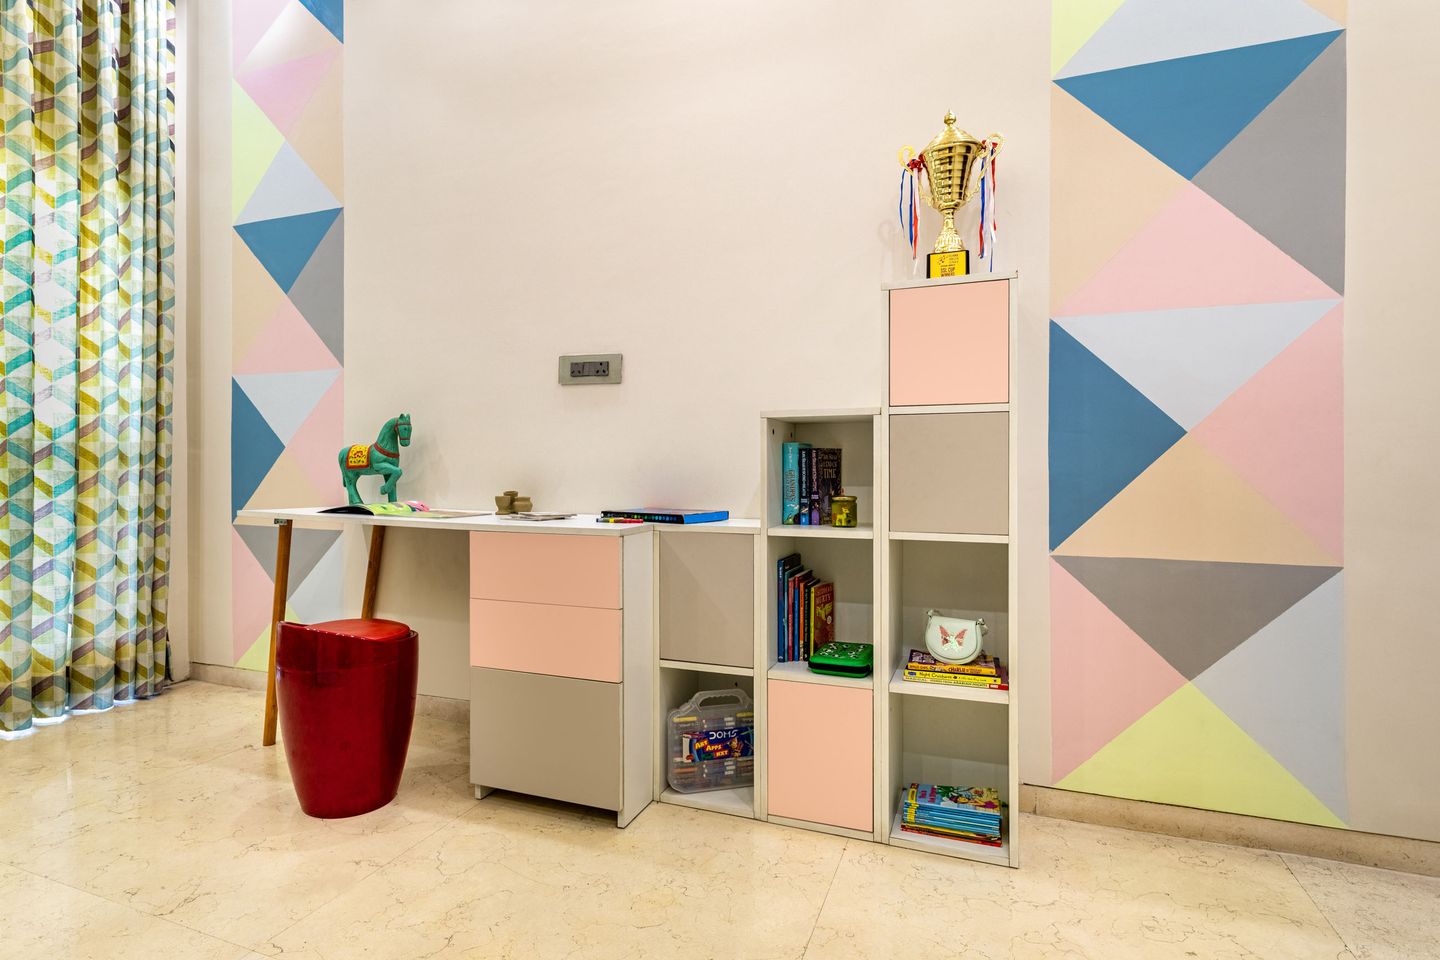 Multicoloured Wall Paint Design With Pastel Tones And Geometric Patterns - Livspace